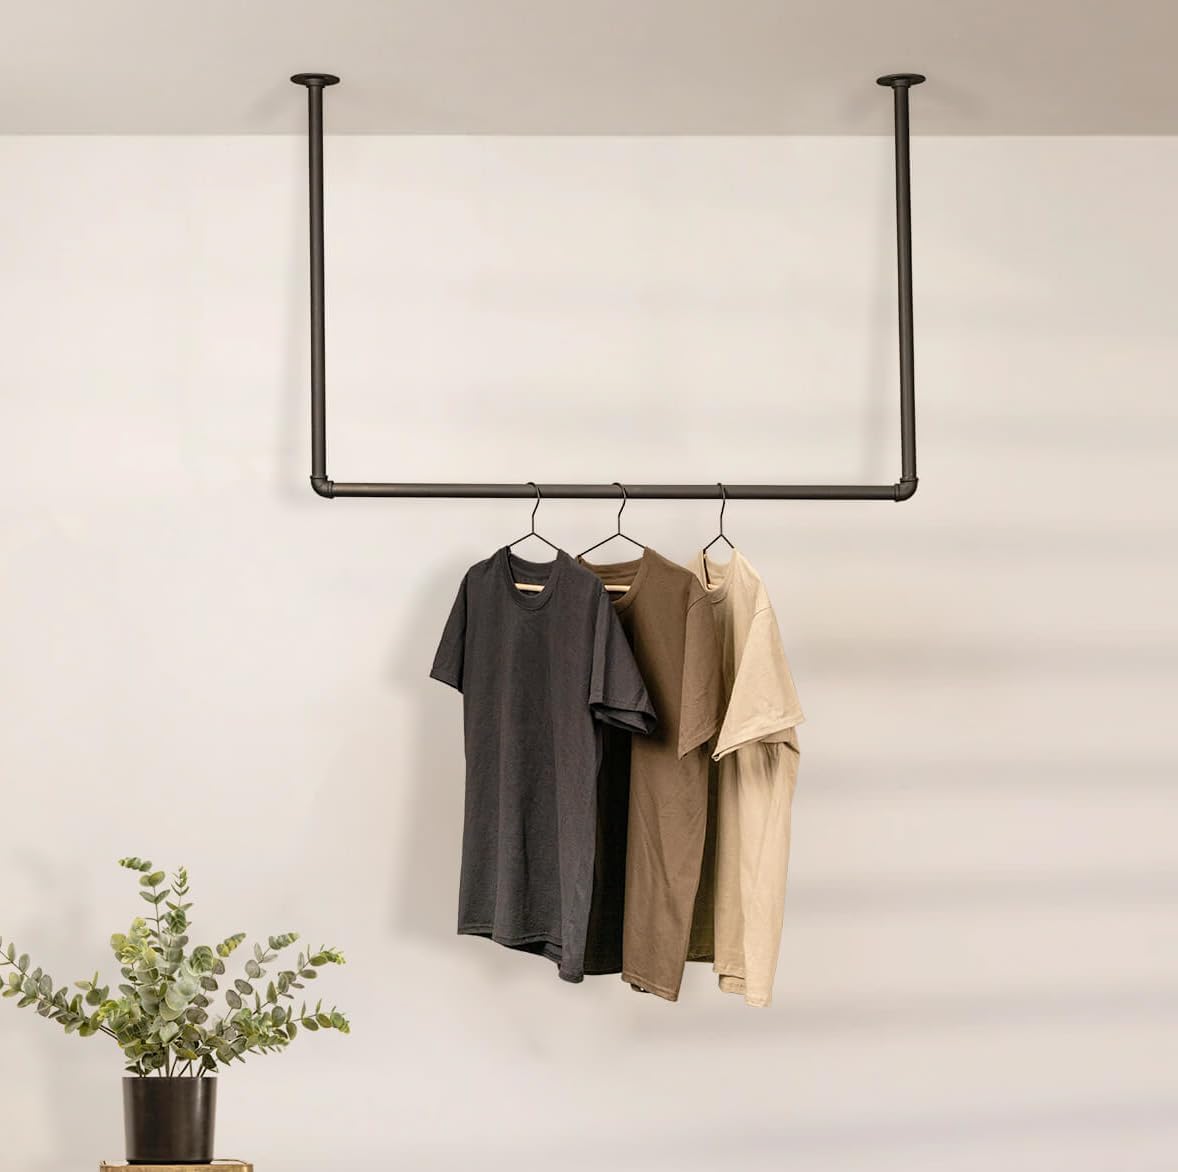 Hangers Industrial Design Clothes Rail for Ceiling